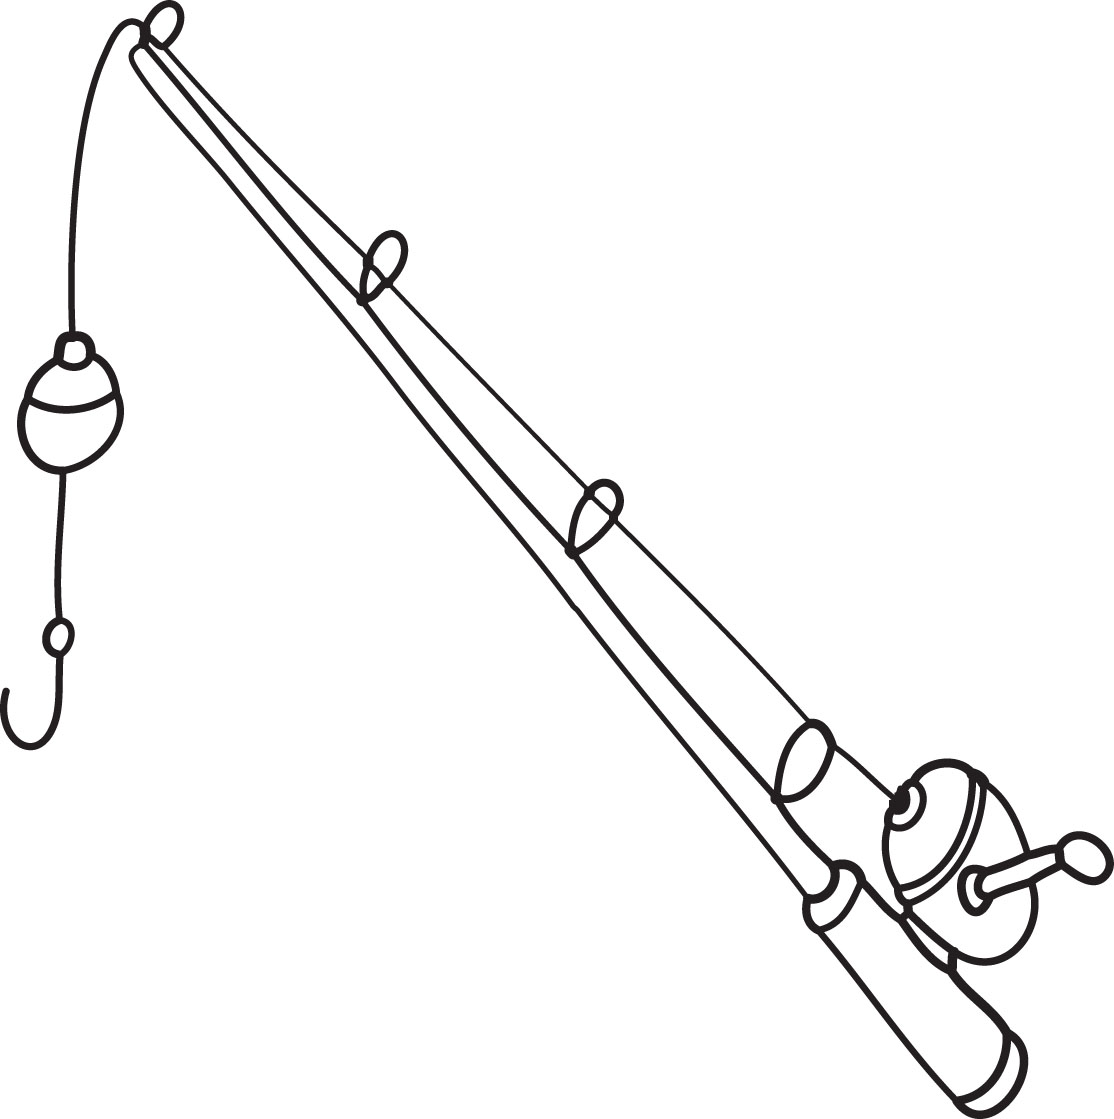 515 Animal Fishing Rod Coloring Pages for Adult